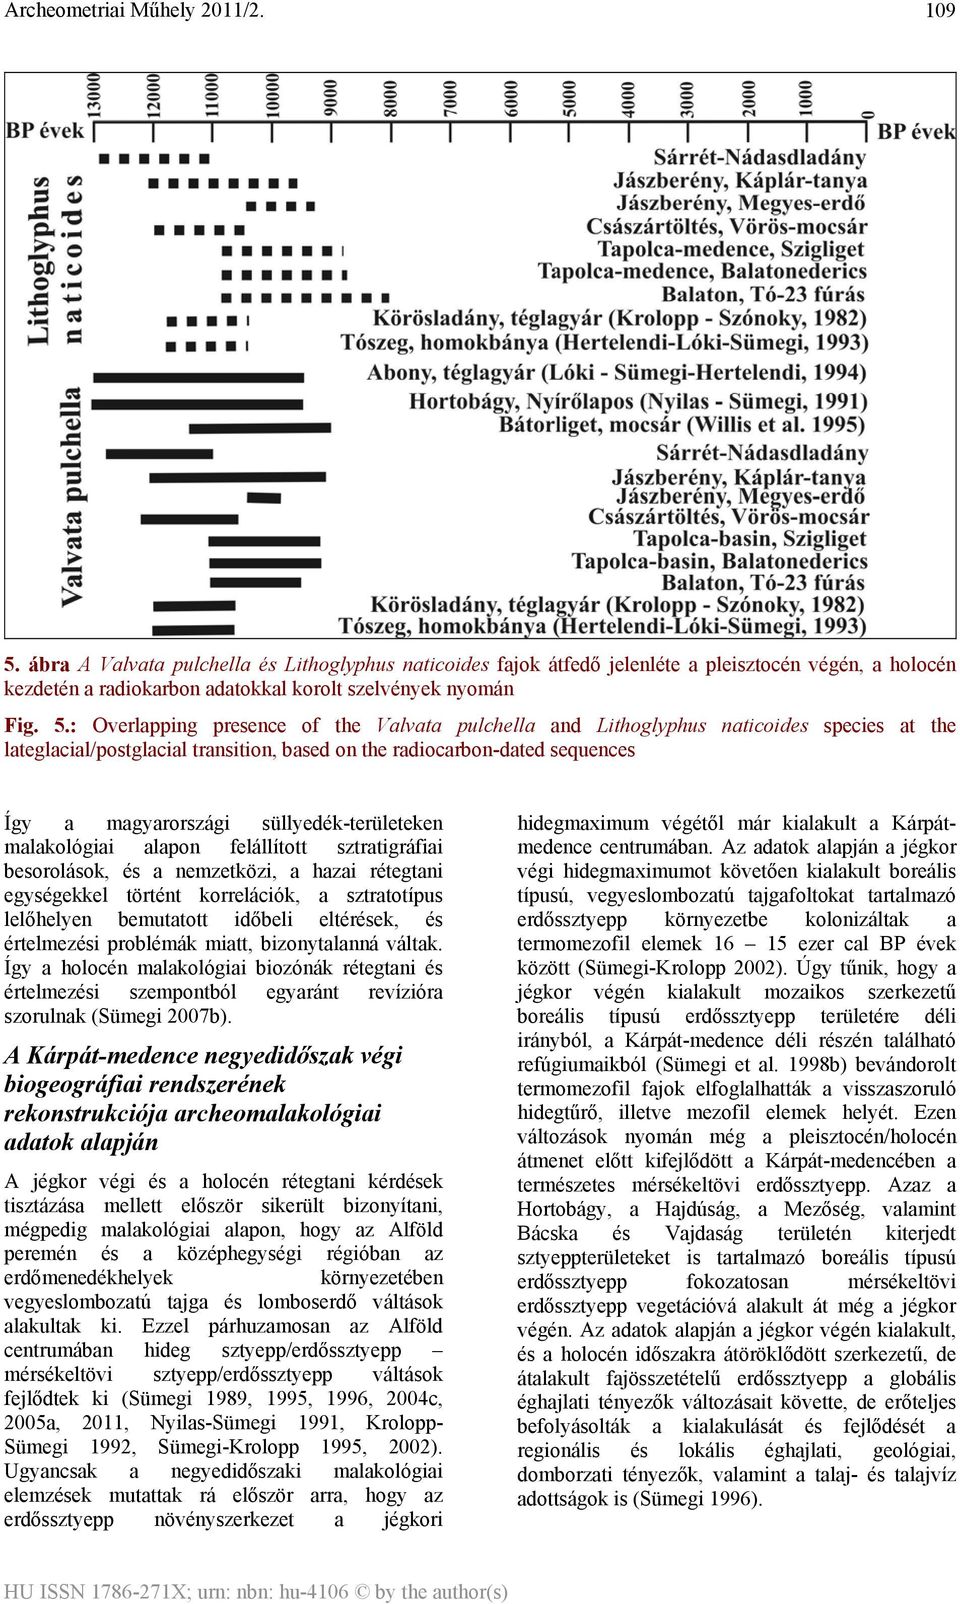 : Overlapping presence of the Valvata pulchella and Lithoglyphus naticoides species at the lateglacial/postglacial transition, based on the radiocarbon-dated sequences Így a magyarországi